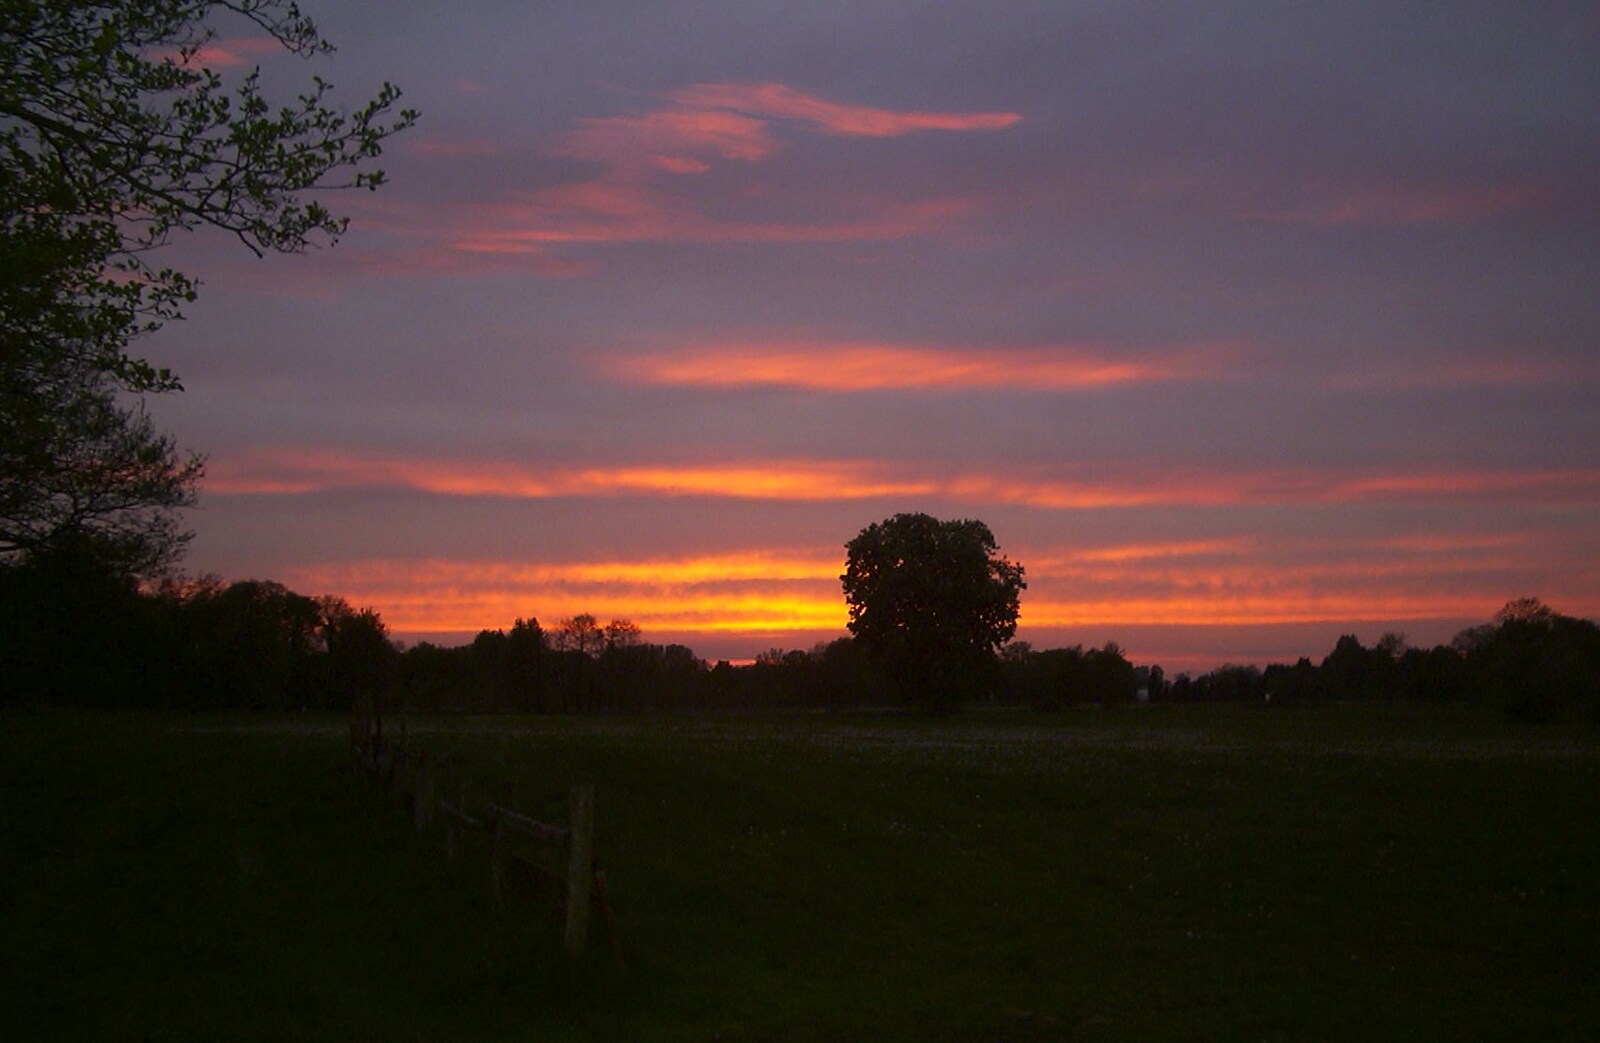 Sunset over Kelling Heath from The BSCC Bike Ride Weekend, Kelling, Norfolk - 9th May 2003